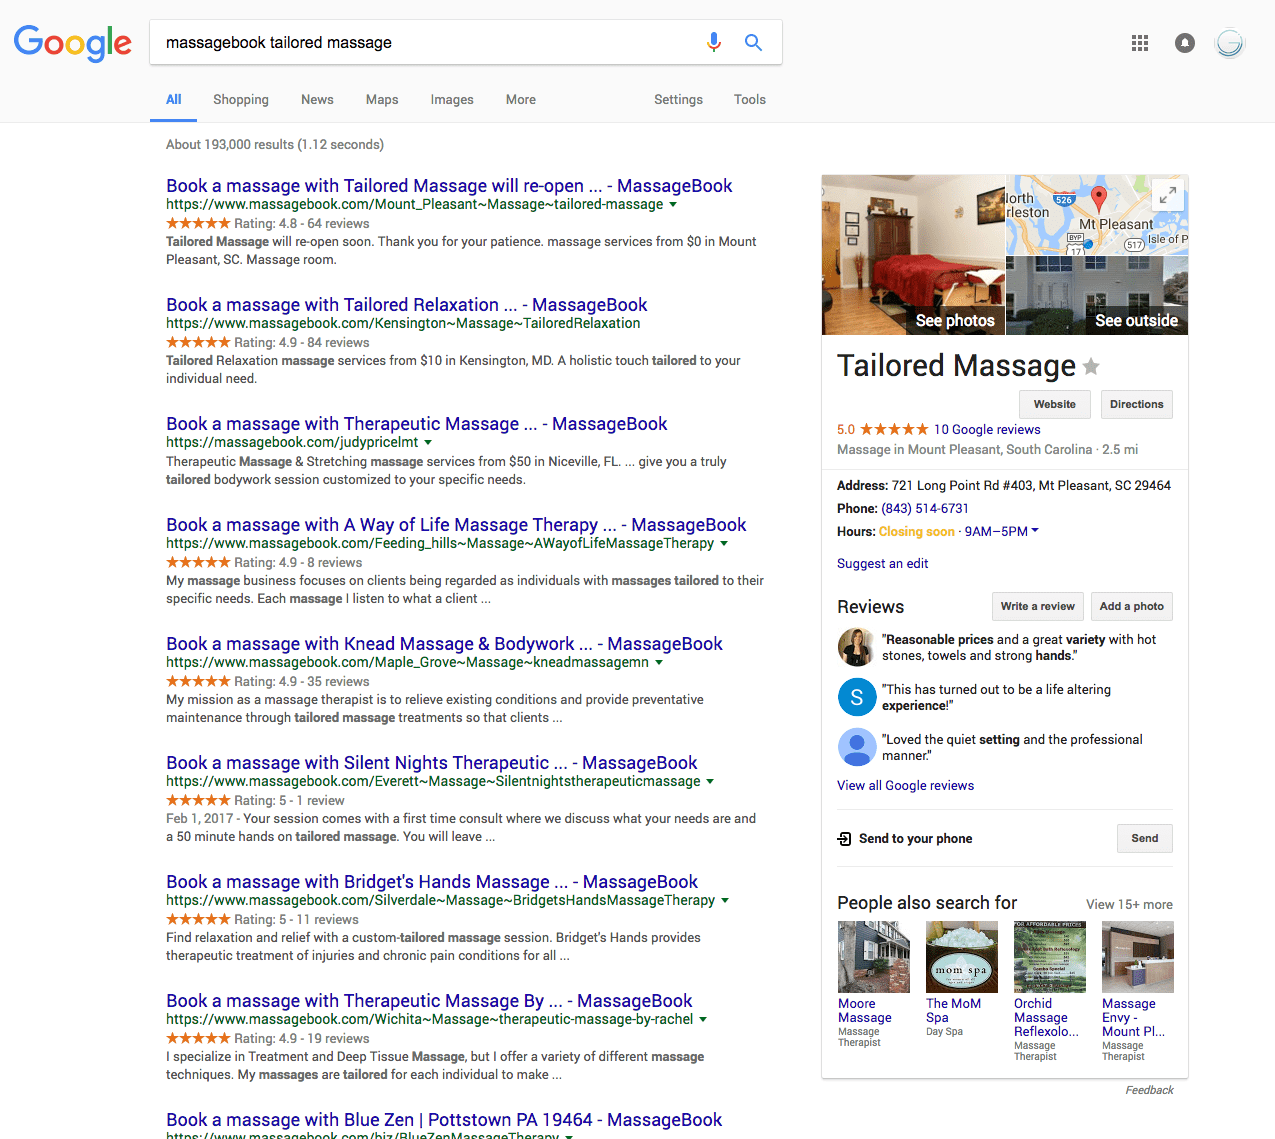  Display reviews in Google search results 